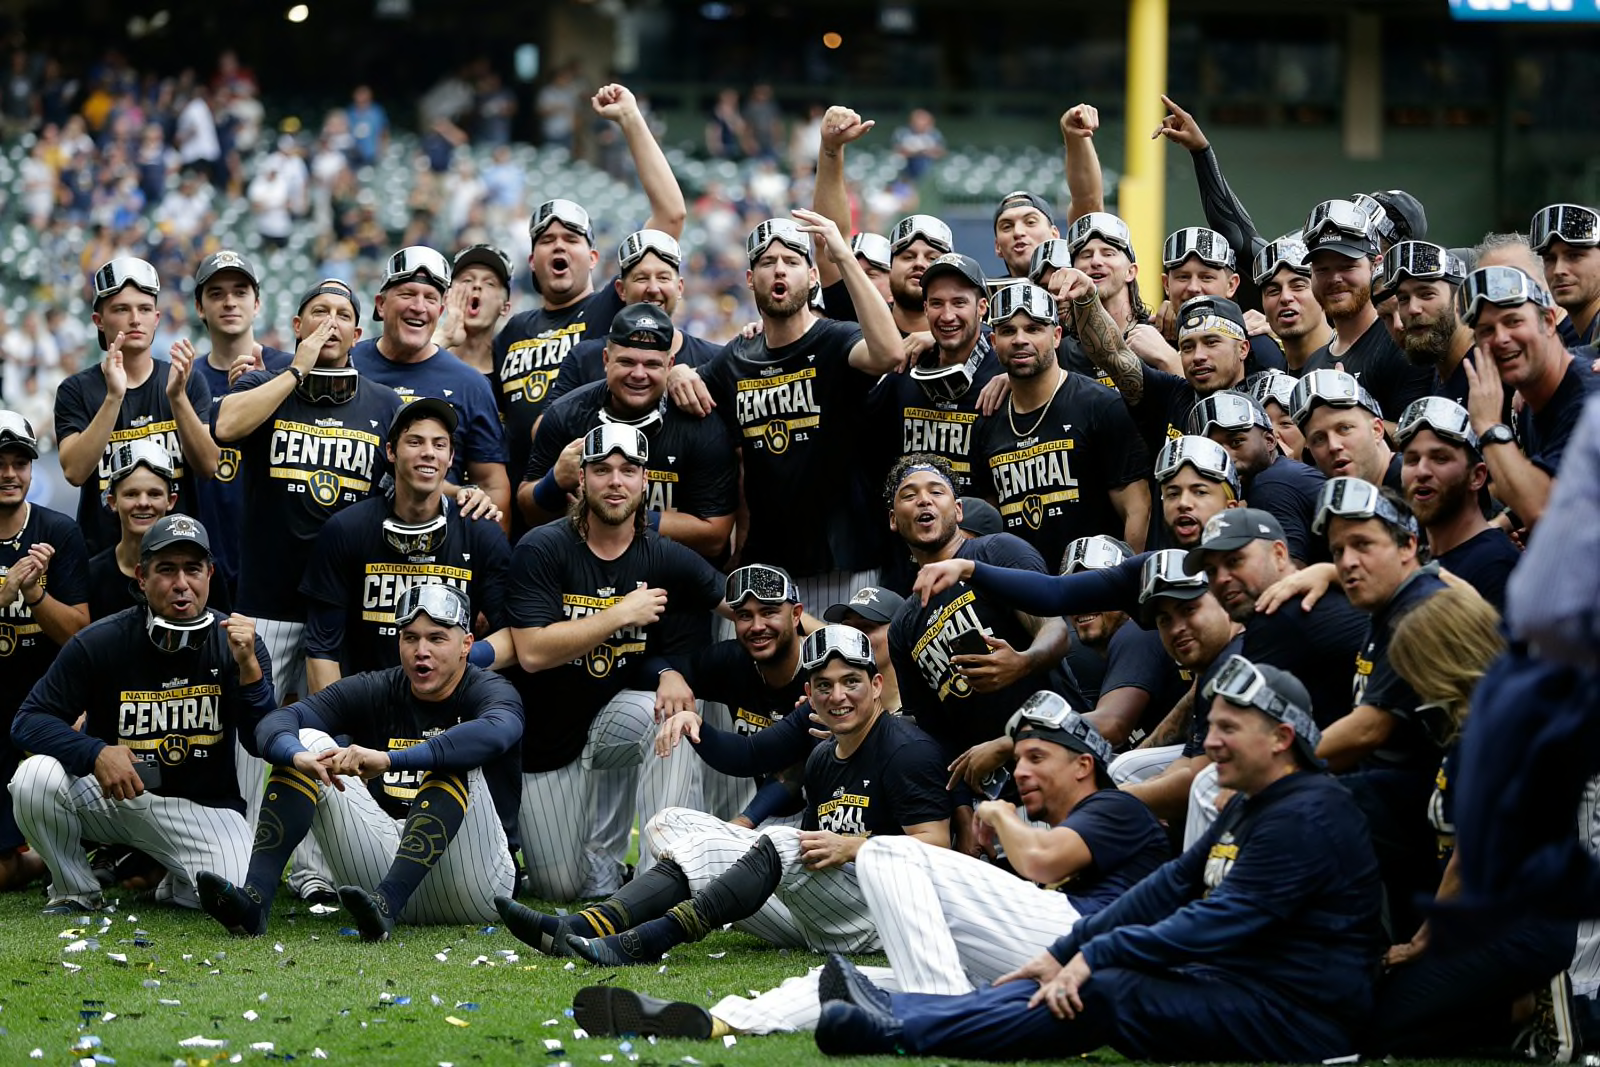 The national league central belongs to your milwaukee brewers